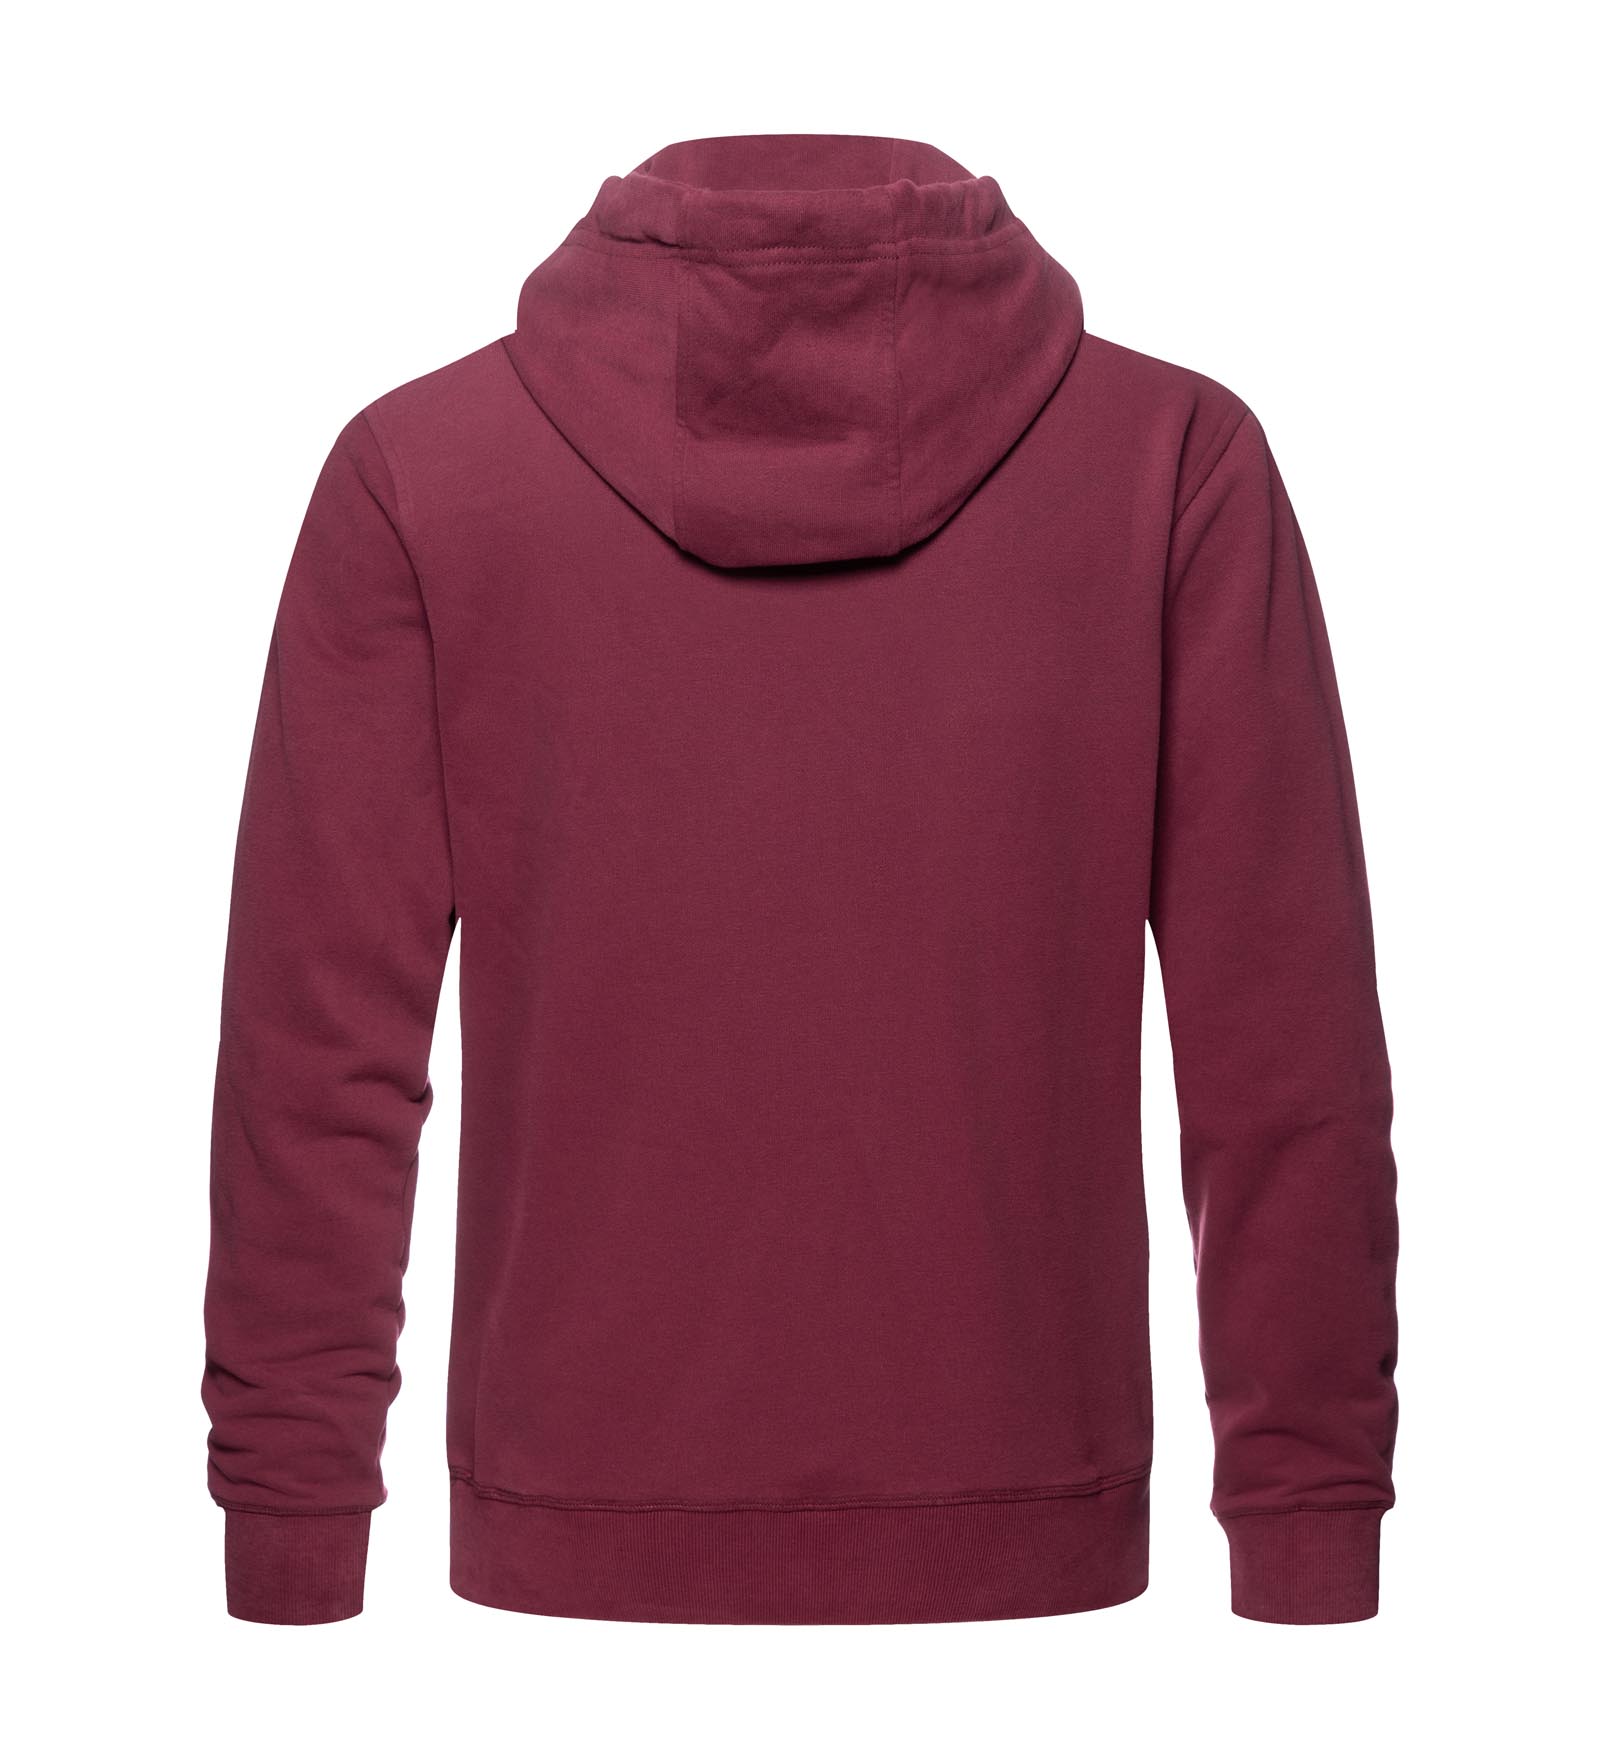 Hoodie Red for Men and Women 